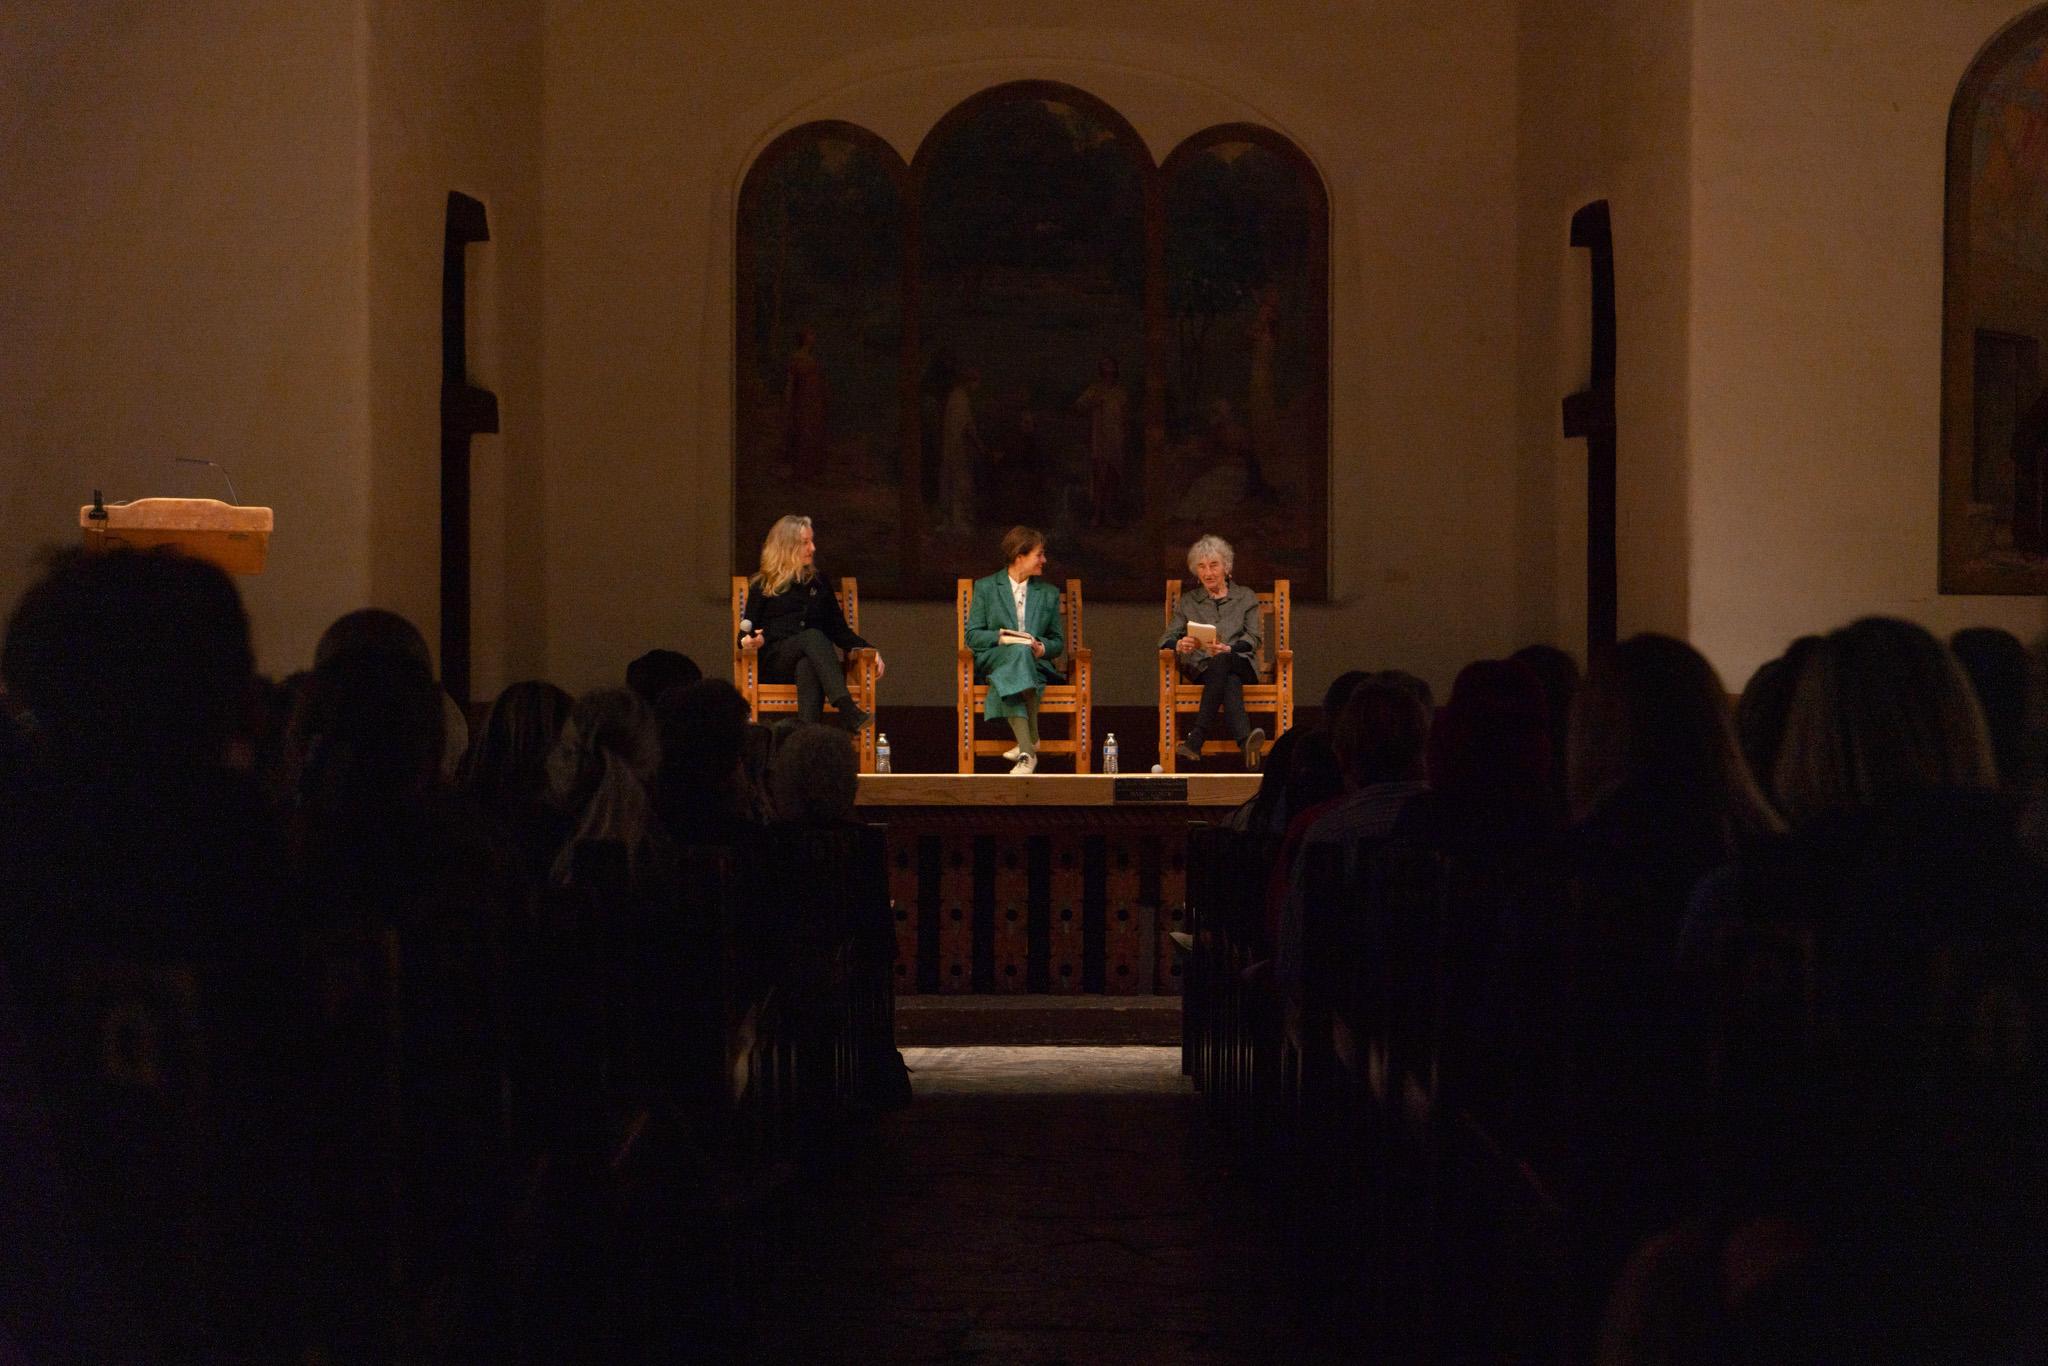 Rebecca Solnit, Lisa Le Feuvre, and Lucy Lippard in conversation at the 2023 Holt/Smithson Foundation Annual Lecture at the New Mexico Museum of Art 